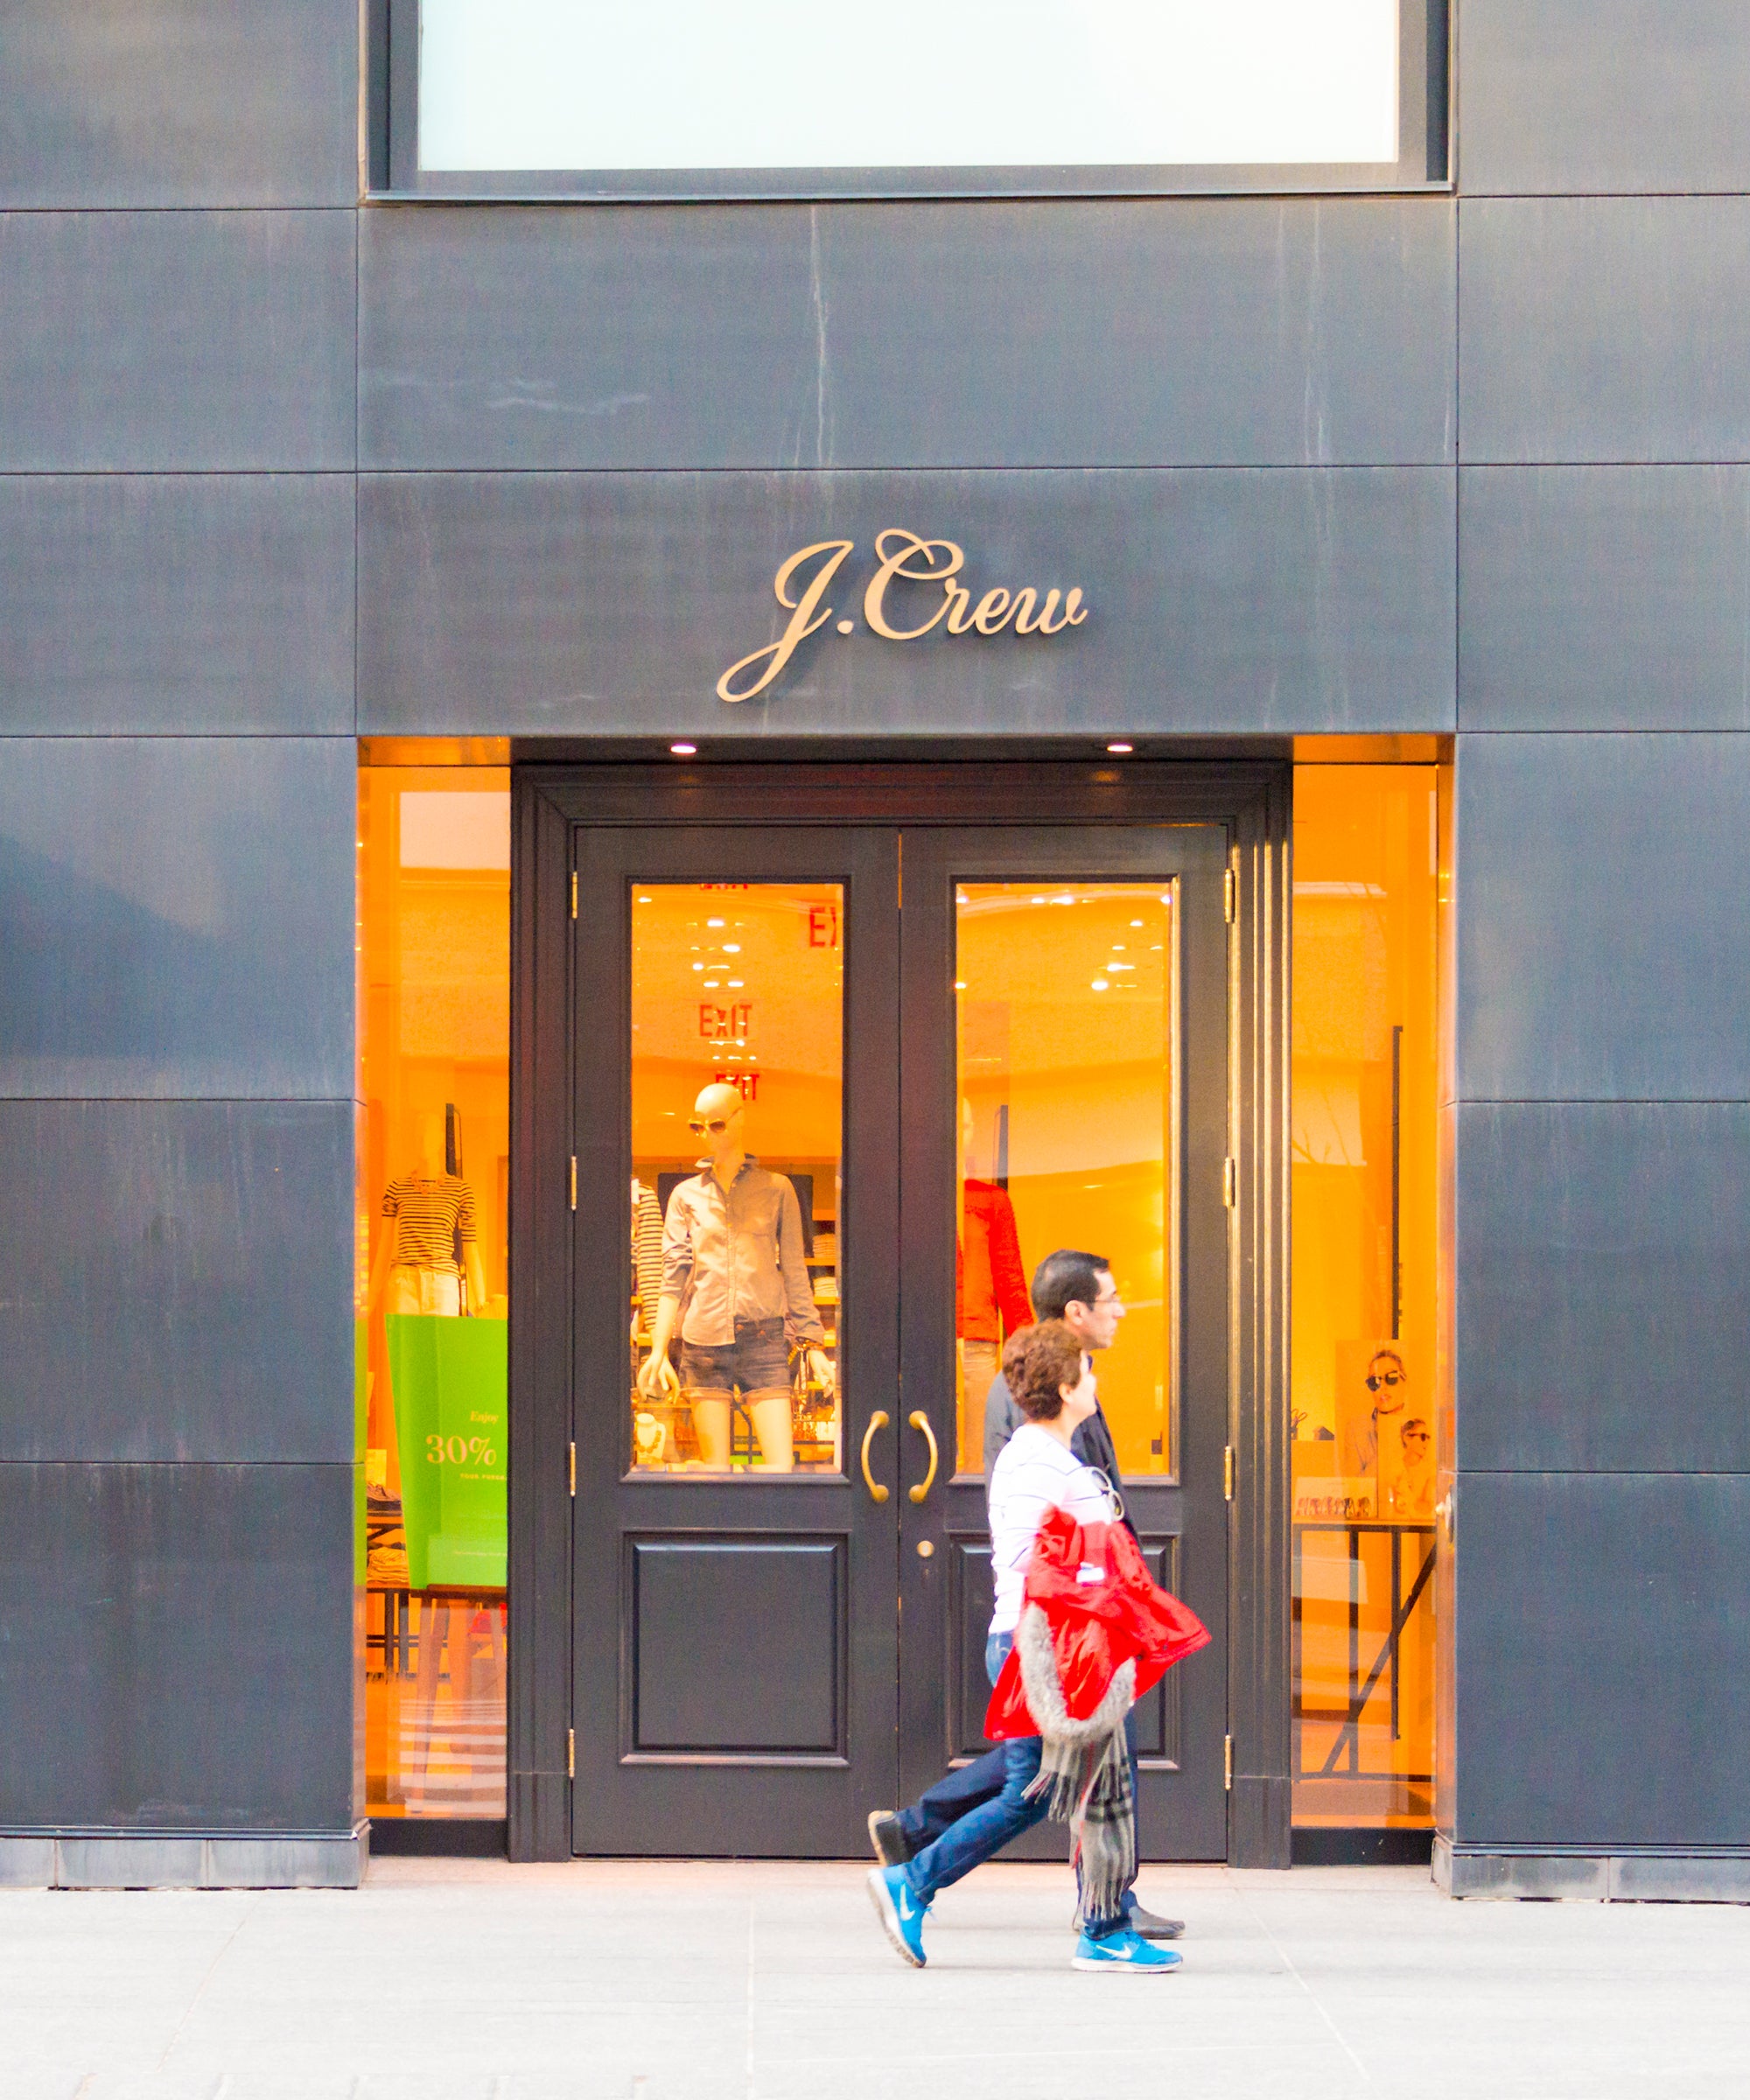 Lenders give Neiman Marcus more time to grow out from overwhelming debt